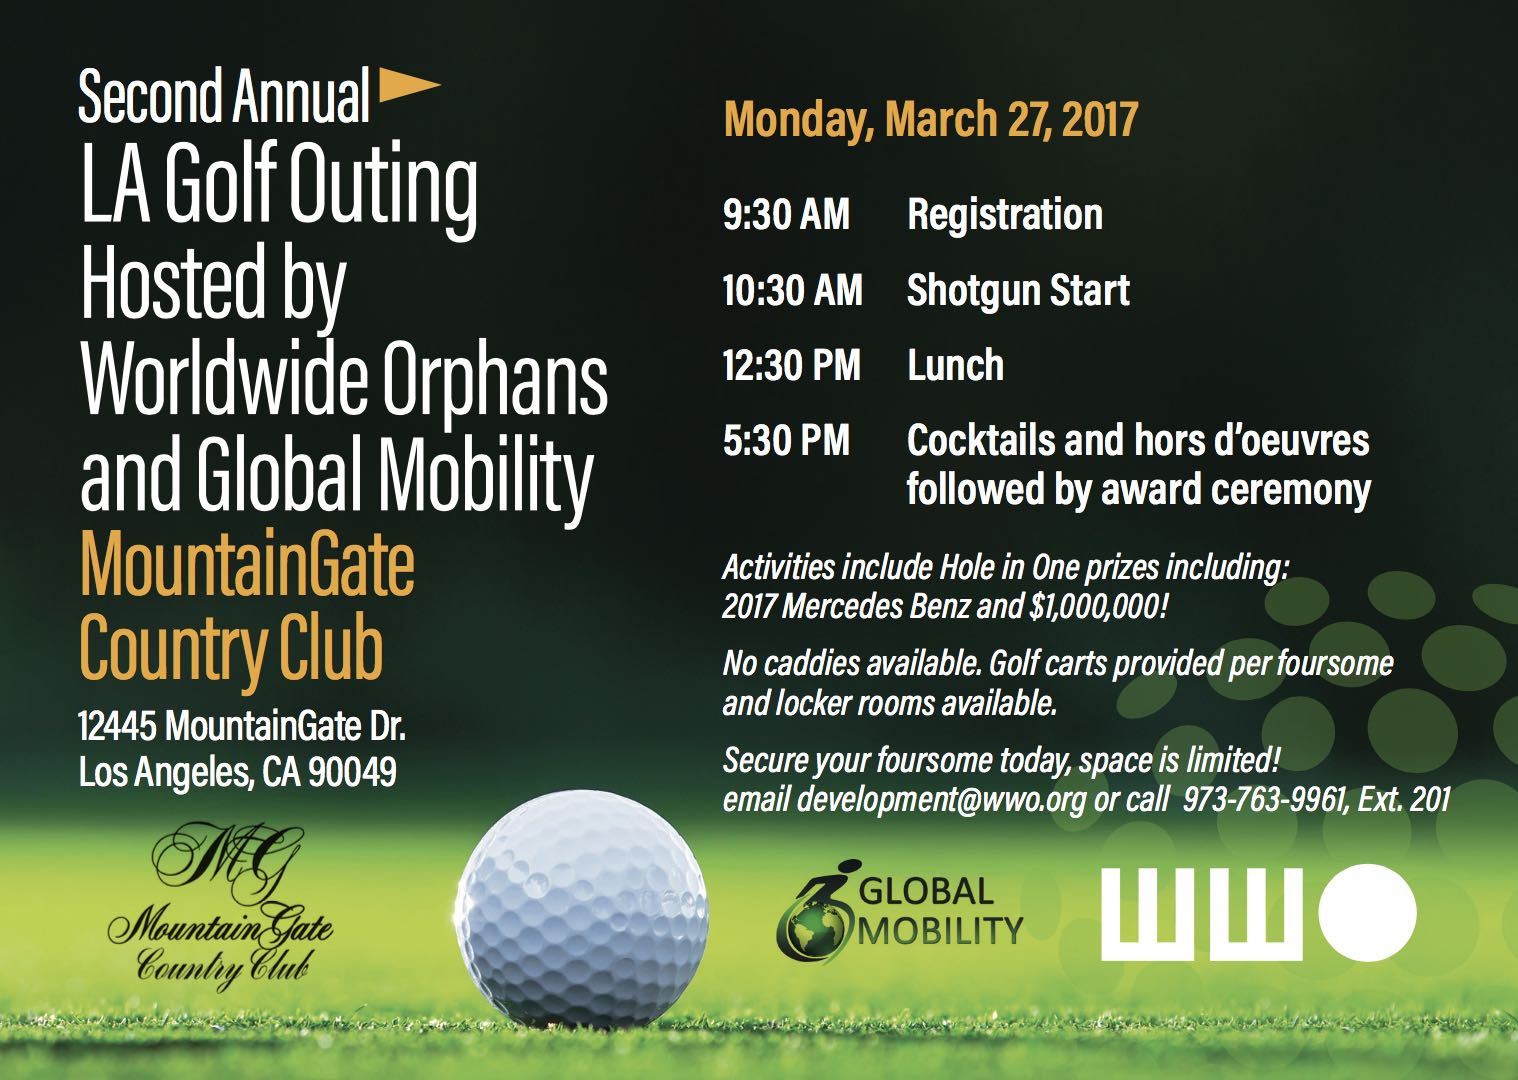 Second Annual LA Golf Outing Hosted by Worldwide Orphans and Global Mobility